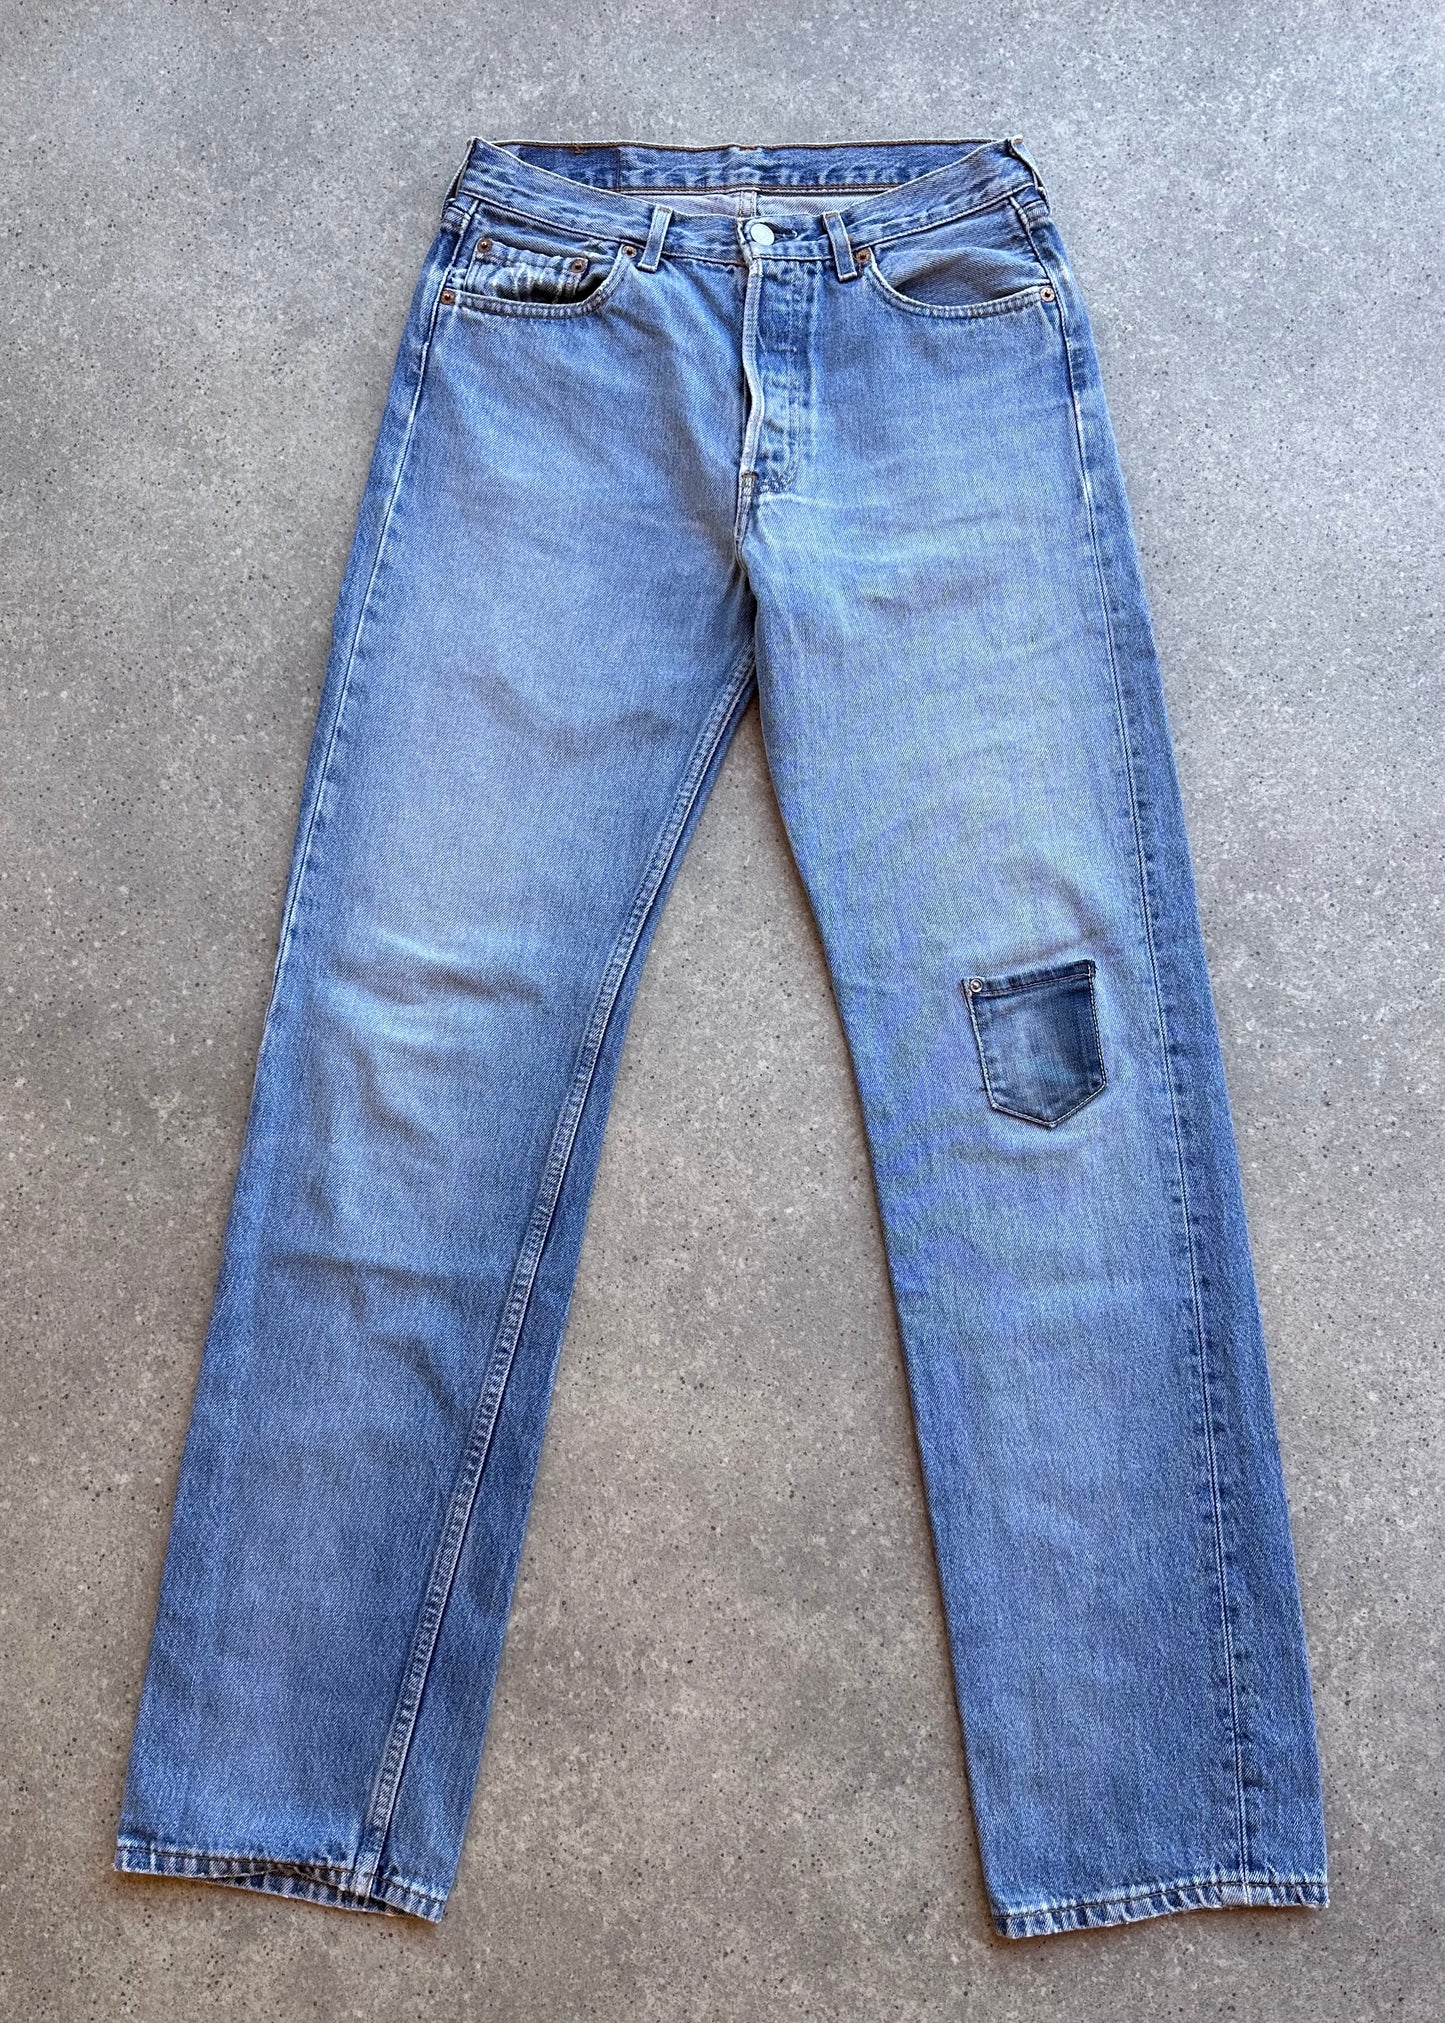 B3UPCYCLE - MULTIPOCKET LEVI’S JEANS #6